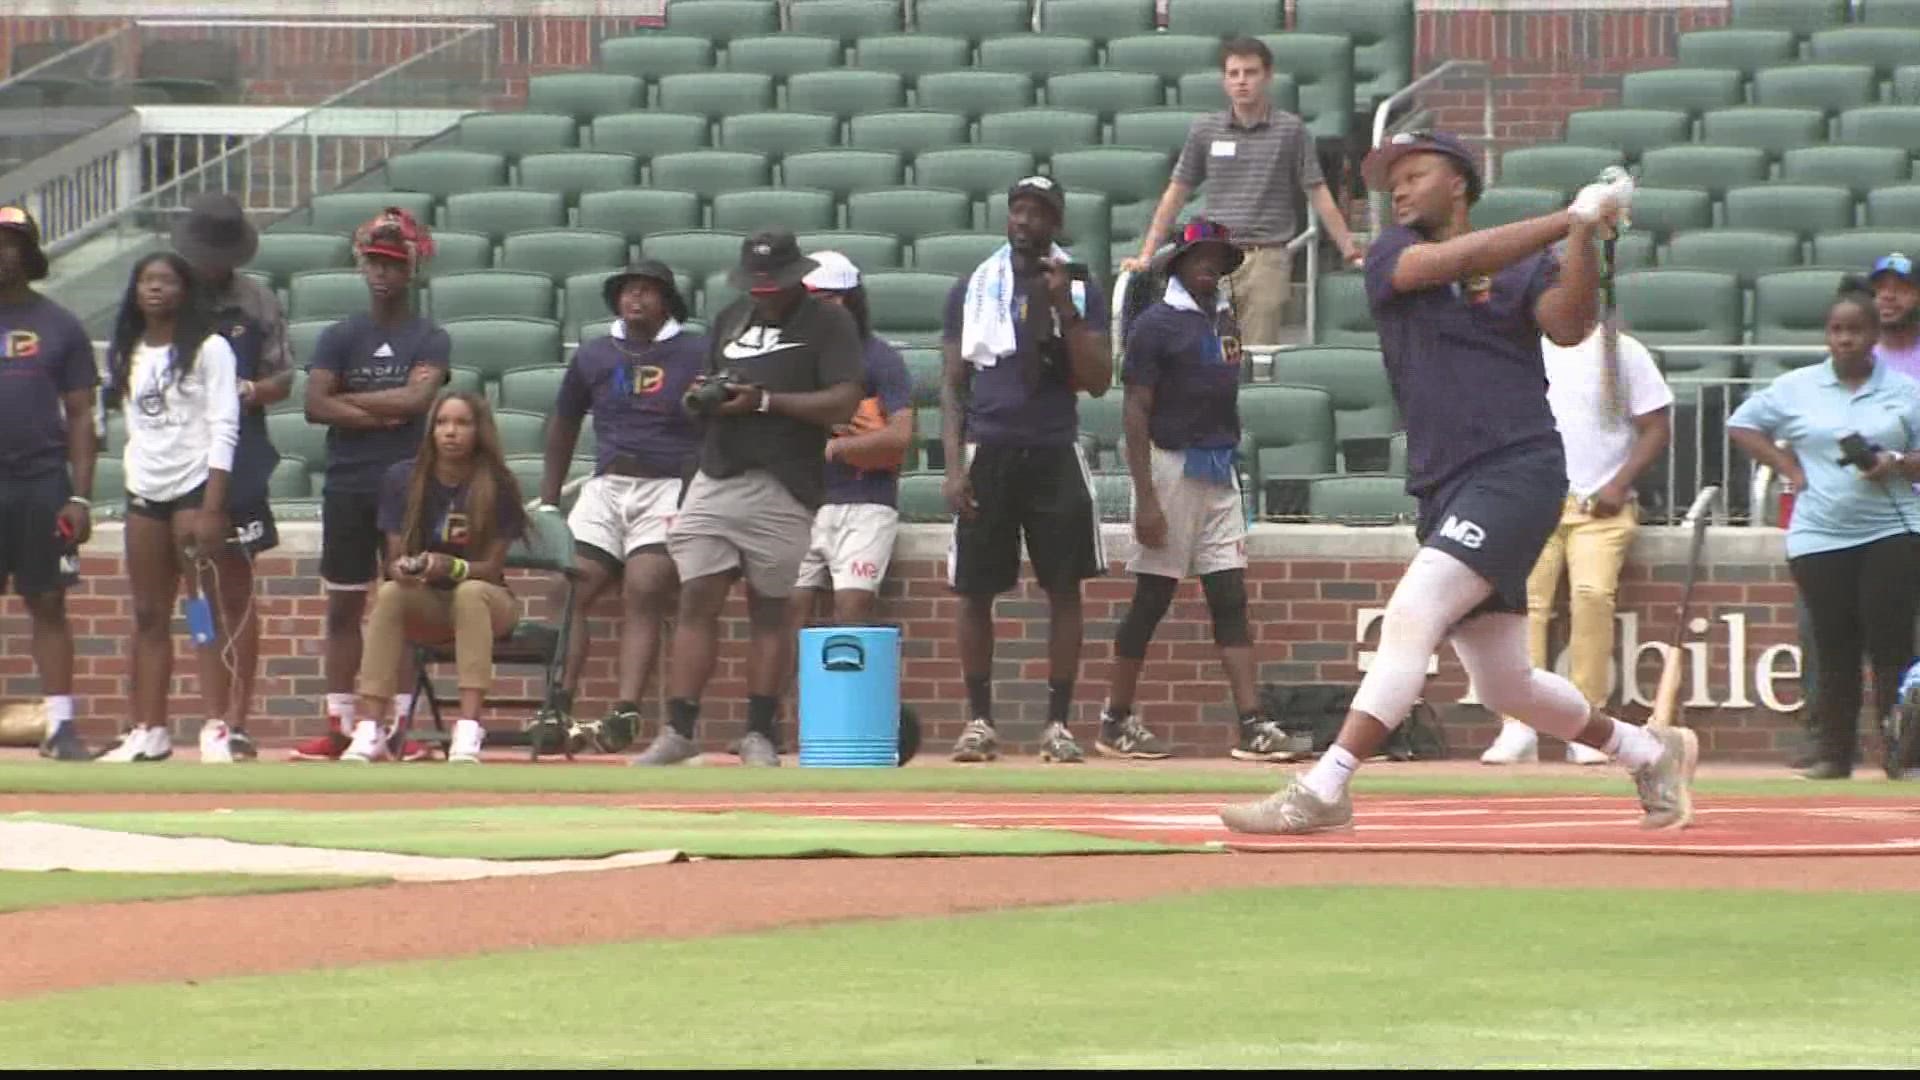 Student-athletes took over Truist Park for the HBCU All-Star Game.